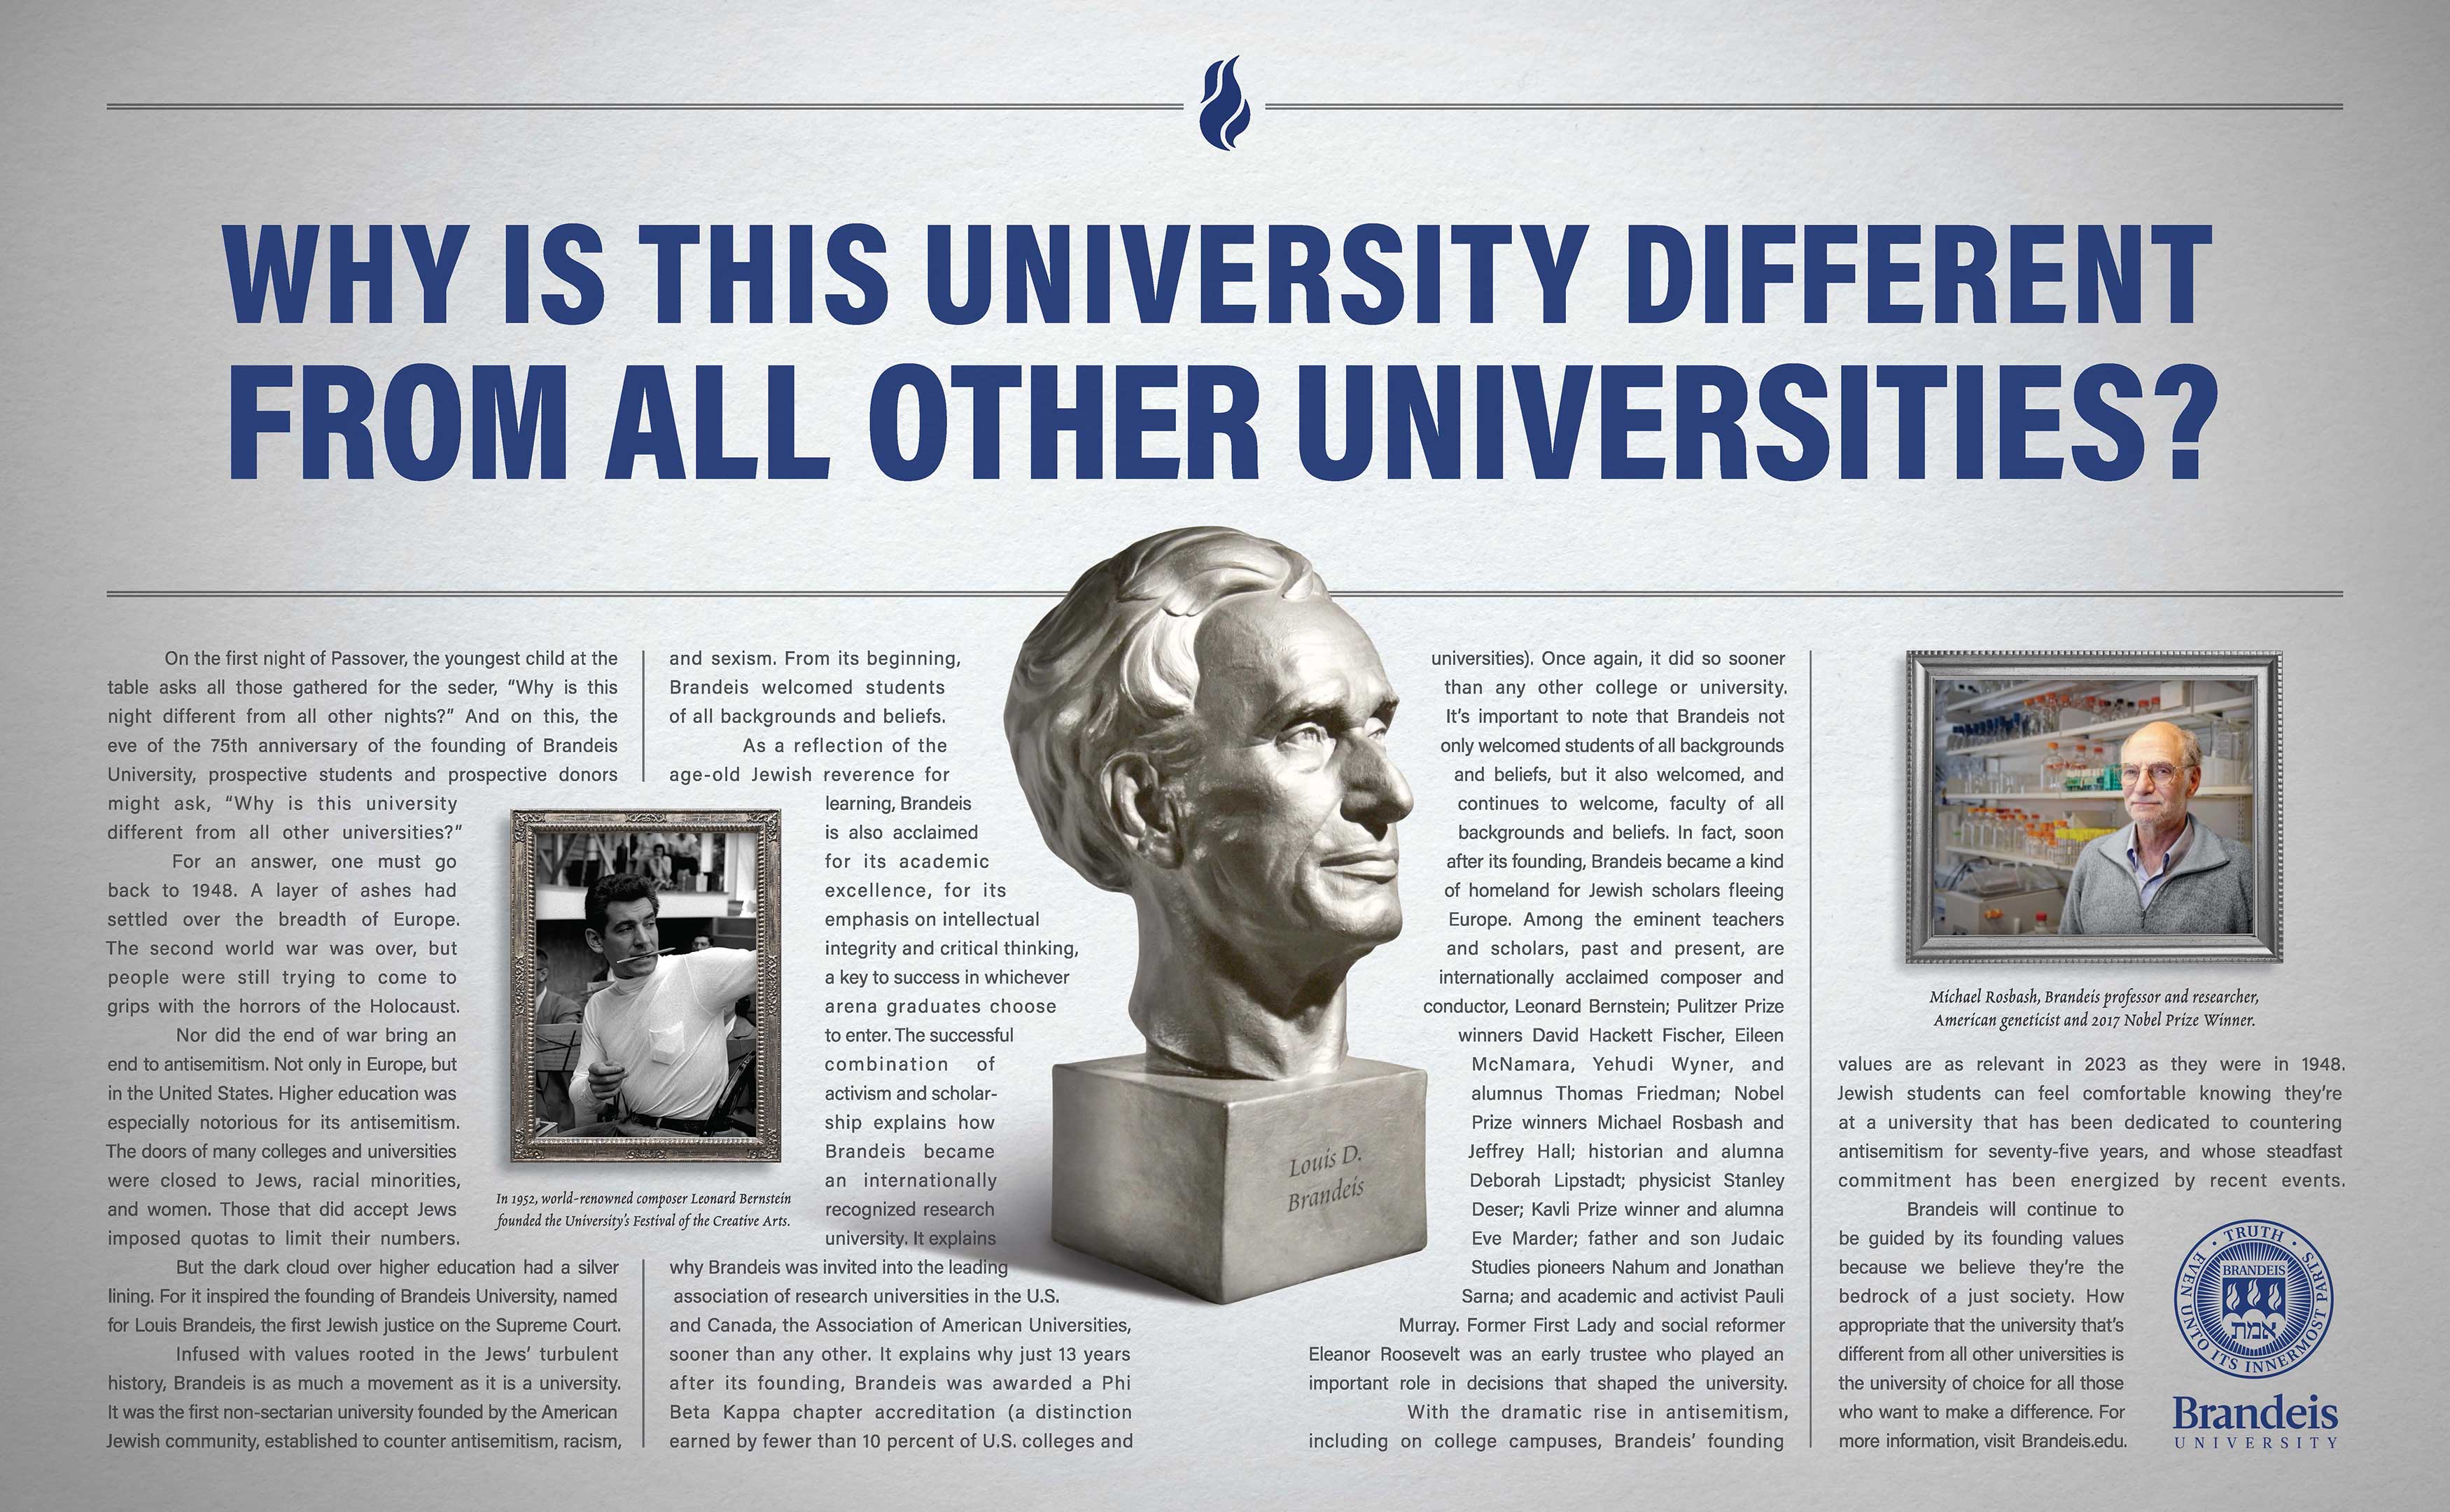 Ad Headline: Why is this university different from all other universities? Ad Text: On the first night of Passover, the youngest child at the table asks all those gathered for the seder, “Why is this night different from all other nights?” And on this, the eve of the 75th anniversary of the founding of Brandeis University, prospective students and prospective donors might ask, “Why is this university different from all other universities?” For an answer, one must go back to 1948. A layer of ashes had settled over the breadth of Europe. The second world war was over, but people were still trying to come to grips with the horrors of the Holocaust. Nor did the end of war bring an end to antisemitism. Not only in Europe, but in the United States. Higher education was especially notorious for its antisemitism. The doors of many colleges and universities were closed to Jews, racial minorities, and women. Those that did accept Jews imposed quotas to limit their numbers. But the dark cloud over higher education had a silver lining. For it inspired the founding of Brandeis University, named for Louis Brandeis, the first Jewish justice on the Supreme Court. Infused with values rooted in the Jews' turbulent history, Brandeis is as much a movement as it is a university. It was the first non-sectarian university founded by the American Jewish community, established to counter antisemitism, racism, and sexism. From its beginning, Brandeis welcomed students of all backgrounds and beliefs. (Photo of Leonard Bernstein with the caption, “In 1952, world-renowned composer Leonard Bernstein founded the University's Festival of the Creative Arts.”) As a reflection of the age-old Jewish reverence for learning, Brandeis is also acclaimed for its academic excellence, for its emphasis on intellectual integrity and critical thinking, a key to success in whichever arena graduates choose to enter. The successful combination of activism and scholar­ship explains how Brandeis became an internationally recognized research university. It explain why Brandeis was invited into the leading  association of research universities in the U.S. and Canada, the Association of American Universities, sooner than any other. It explains why just 13 years after its founding, Brandeis was awarded a Phi Beta Kappa chapter accreditation (a distinction earned by fewer than 10 percent of U.S. colleges and universities). (Photo: Bust of Louis Brandeis) Once again, it did so sooner than any other college or university. It's important to note that Brandeis not only welcomed students of all backgrounds and beliefs, but it also welcomed, and continues to welcome, faculty of all backgrounds and beliefs. In fact, soon after its founding, Brandeis became a kind of homeland for Jewish scholars fleeing Europe. Among the eminent teachers and scholars, past and present, are internationally acclaimed composer and conductor, Leonard Bernstein; Pulitzer Prize winners David Hackett Fischer, Eileen McNamara, Yehudi Wyner, and alumnus Thomas Friedman; Nobel Prize winners Michael Rosbash and Jeffrey Hall; historian and alumna Deborah Lipstadt; physicist Stanley Deser; Kavli Prize winner and alumna Eve Marder; father and son Judaic Studies pioneers Nahum and Jonathan Sarna; and academic and activist Pauli Murray. Former First Lady and social reformer Eleanor Roosevelt was an early trustee who played an important role in decisions that shaped the university. (Photo of Michael Rosbash with caption, “Michael Rosbash, Brandeis professor and researcher, American geneticist and 2017 Nobel Prize Winner”) With the dramatic rise in antisemitism, including on college campuses, Brandeis' founding values are as relevant in 2023 as they were in 1948. Jewish students can feel comfortable knowing they're at a university that has been dedicated to countering antisemitism for seventy-five years, and whose steadfast commitment has been energized by recent events. Brandeis will continue to be guided by its founding values because we believe they're the bedrock of a just society. How appropriate that the university that's different from all other universities is the university of choice for all those who want to make a difference.